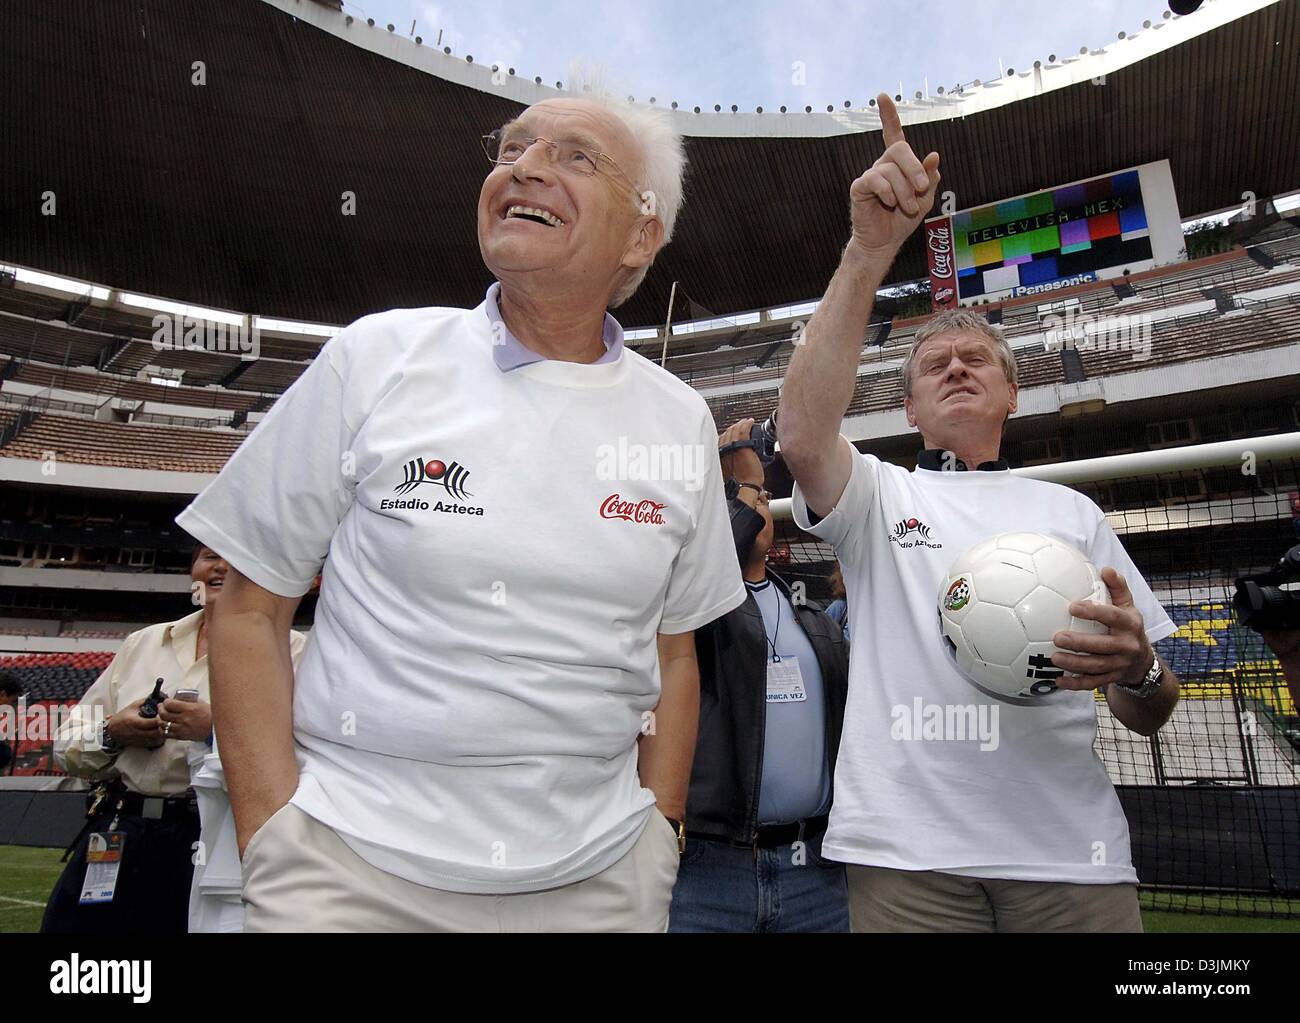 (dpa) - Edmund Stoiber (L), Prime Minister of the German state of Bavaria, and former German national goalkeeping coach Sepp Maier walk together through the Azteca stadium in Mexico City, Mexico, Sunday 06 March 2005. Stoiber's week-long tour through Mexico (5-9 March 2005) and California (9-11 March 2005) centres on the extension of the economical relations with Mexico and the Nor Stock Photo